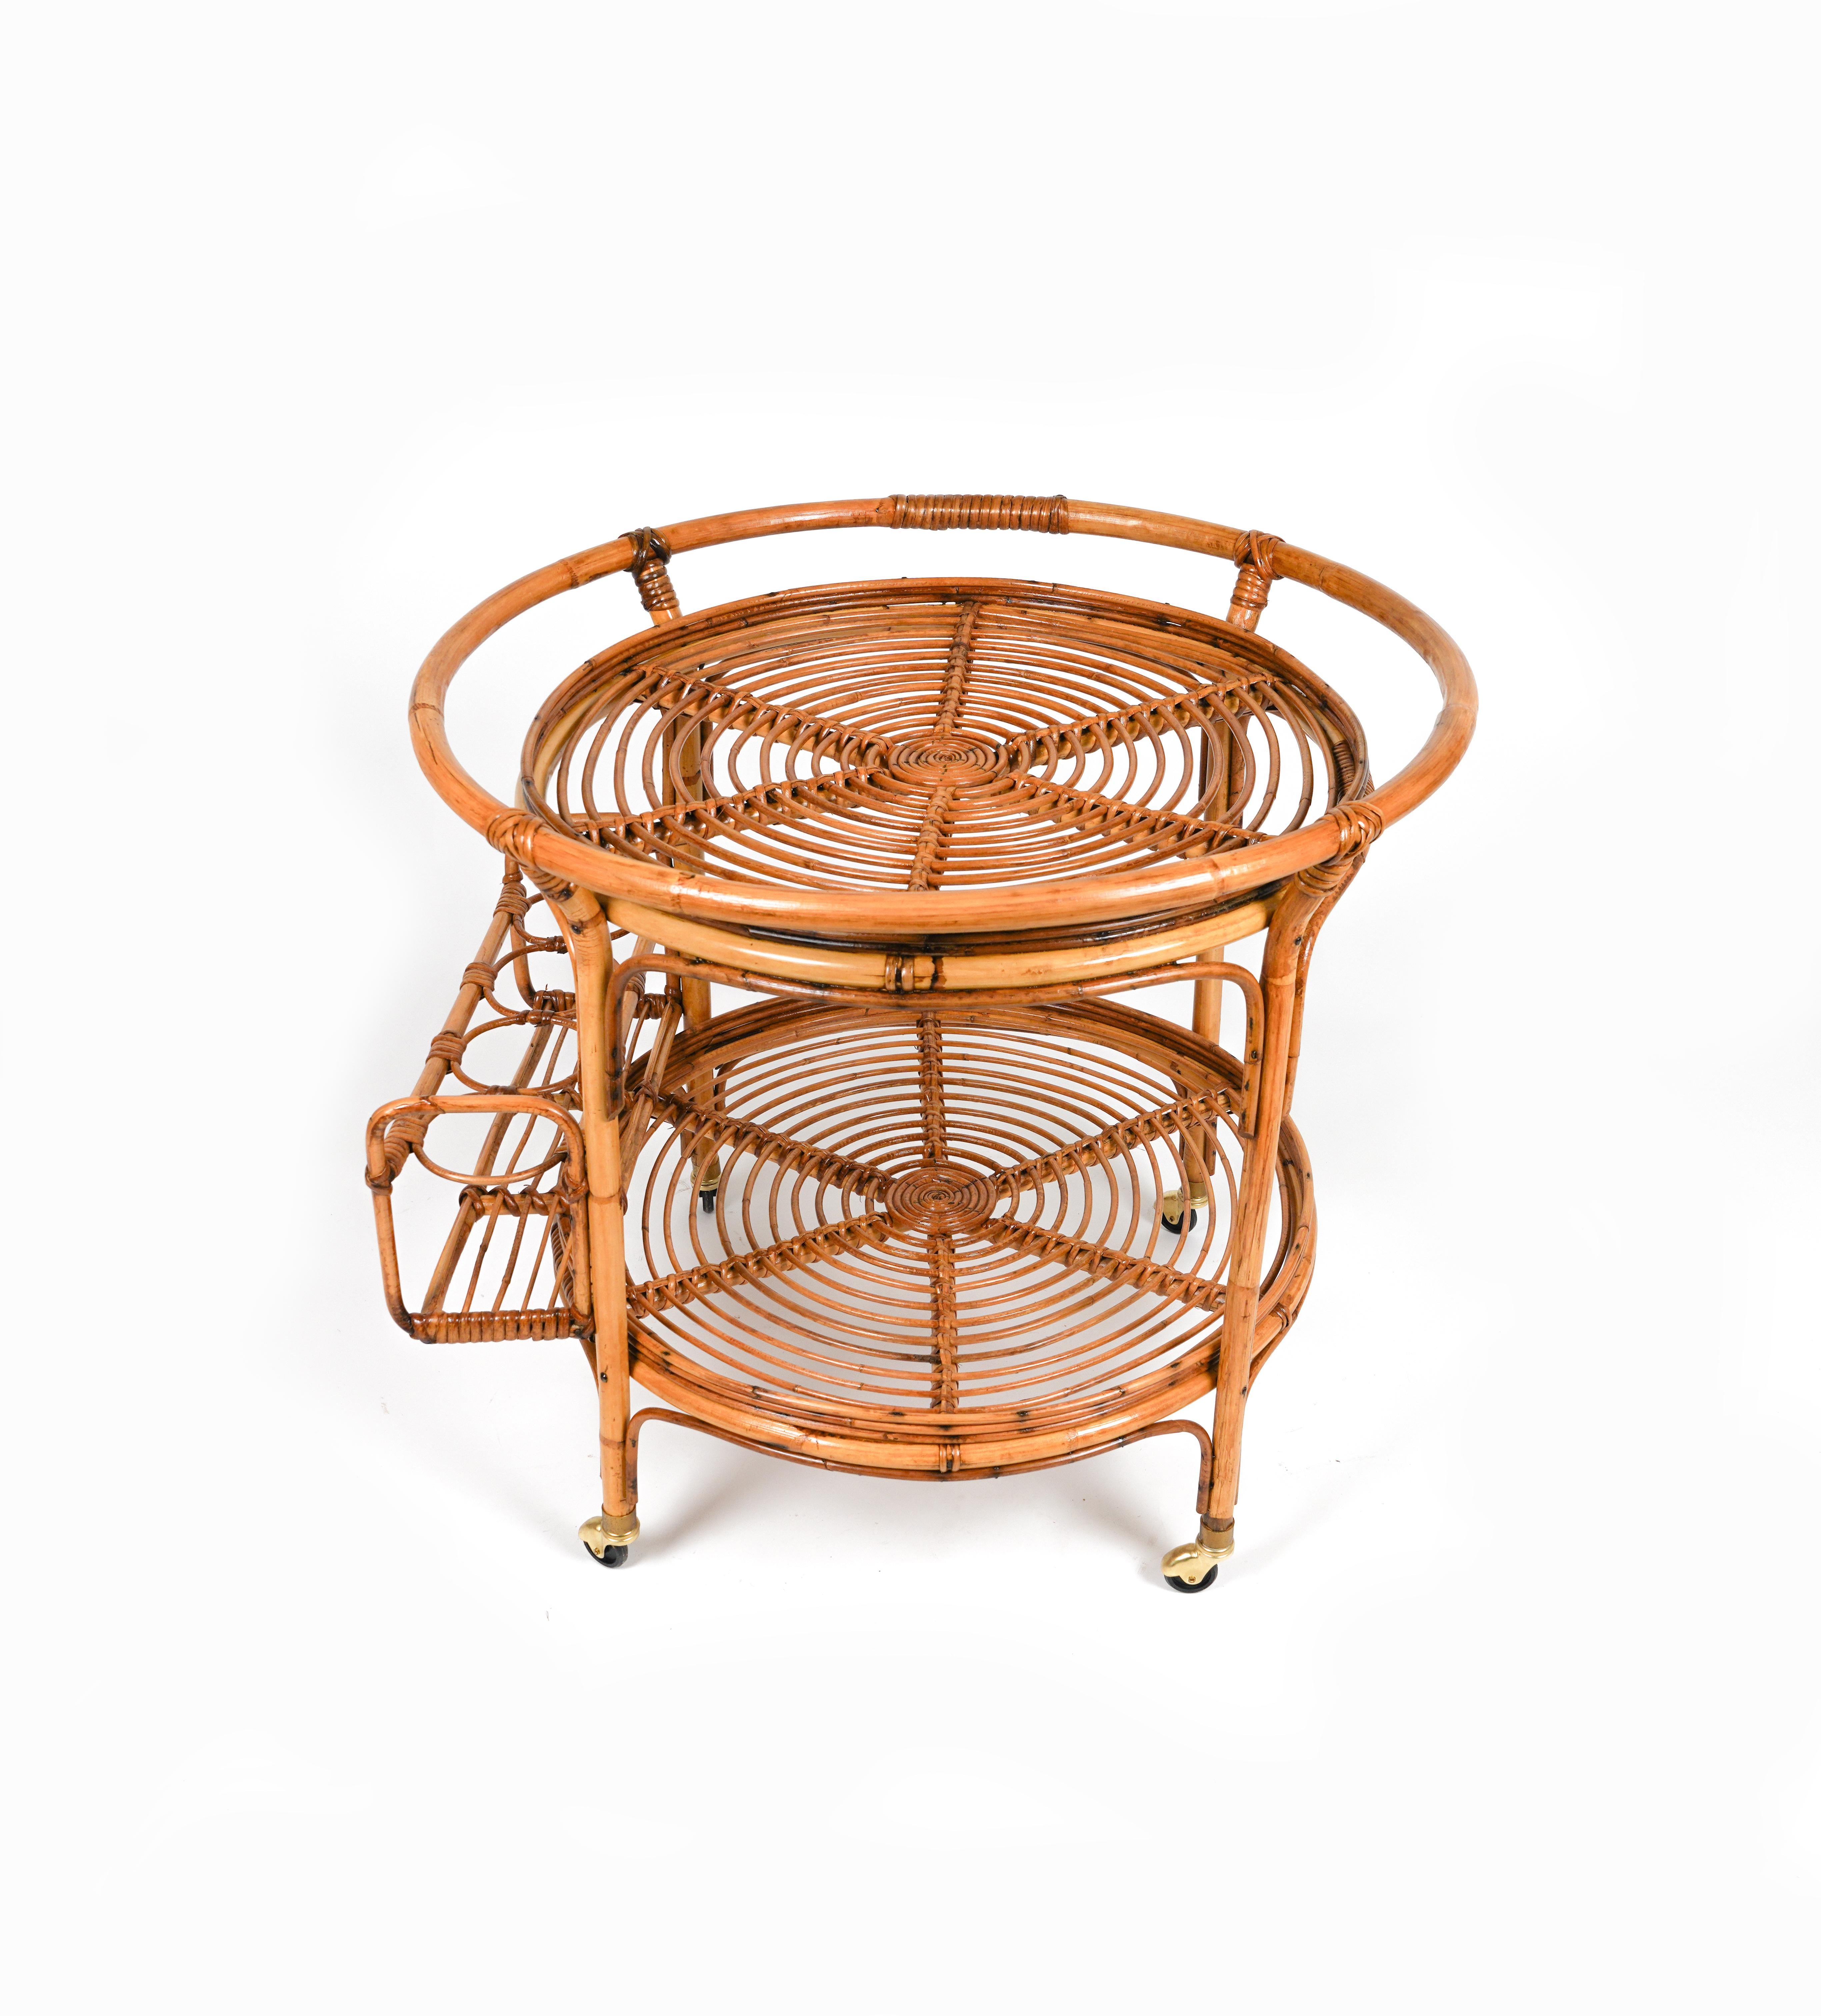 Midcentury Rattan and Bamboo Round Serving Bar Cart Trolley, Italy 1960s For Sale 7